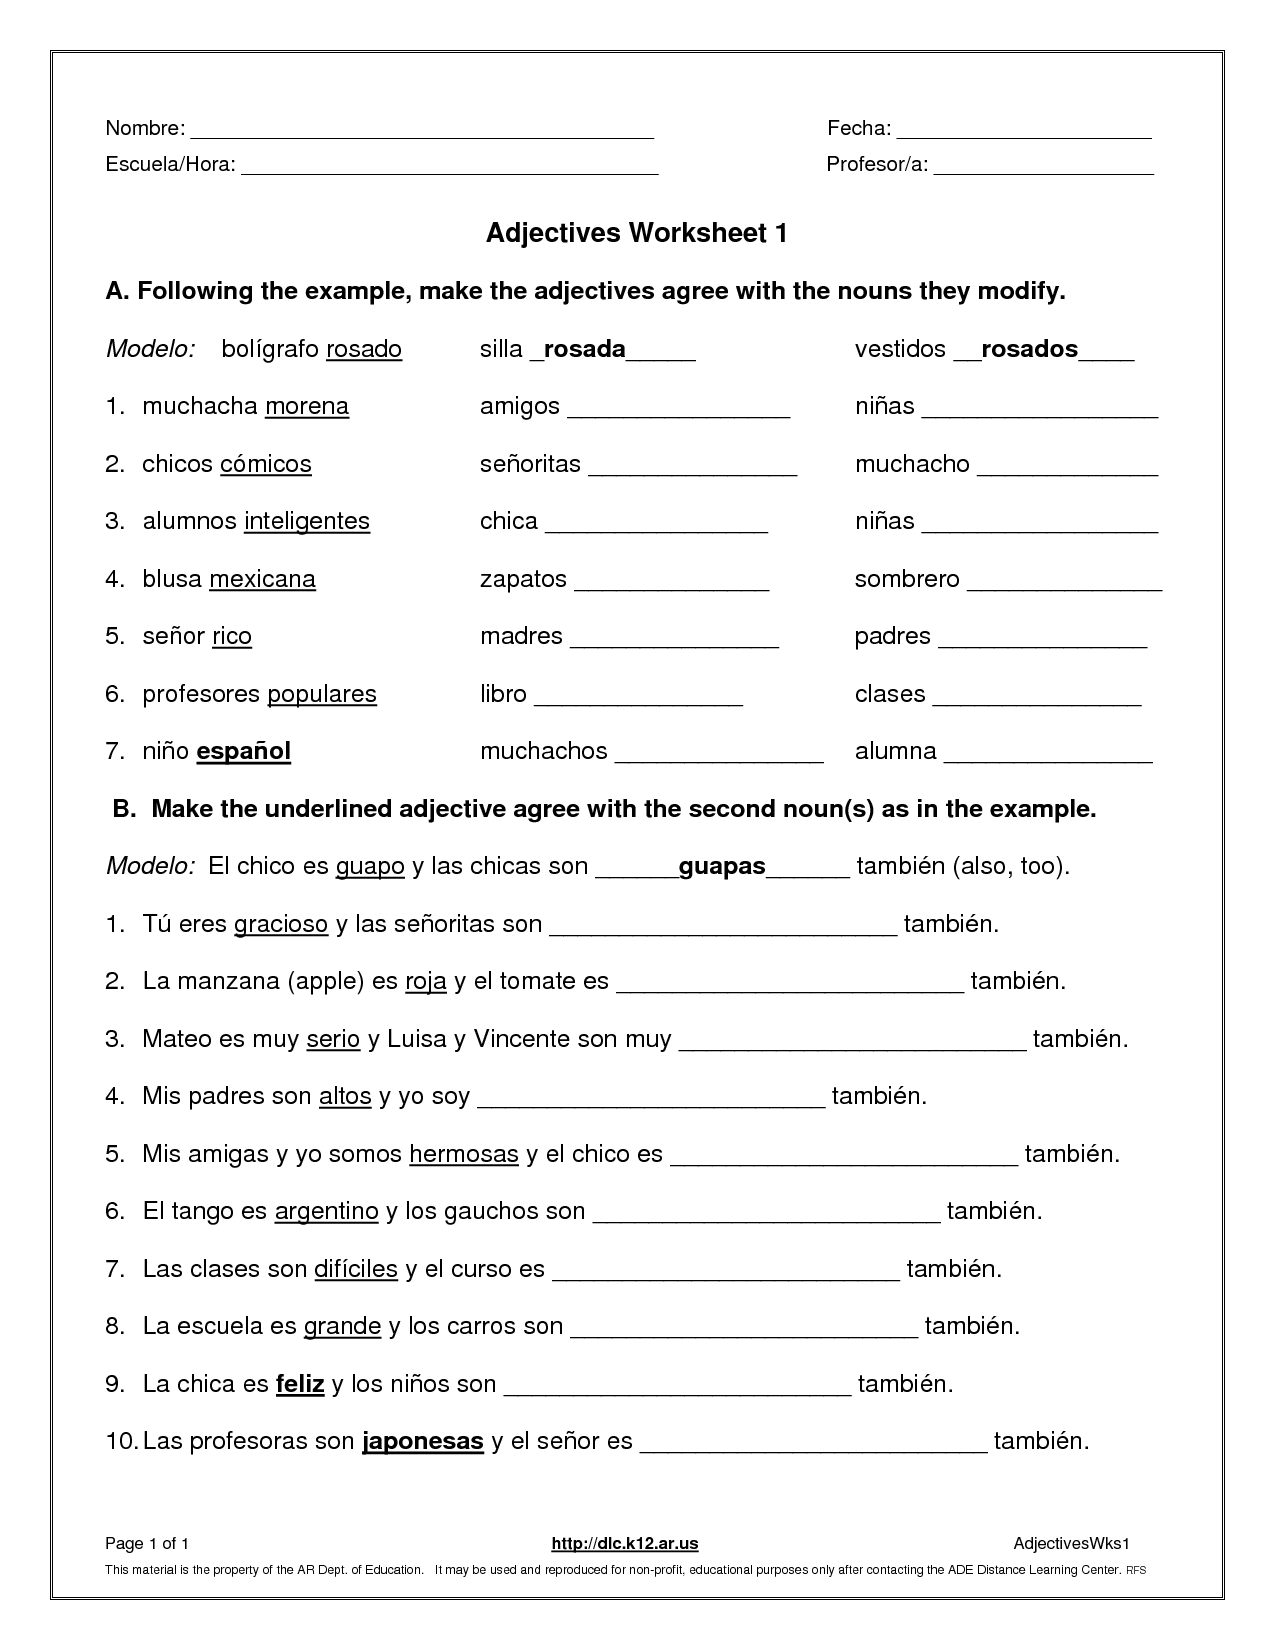 12-best-images-of-comparative-adjectives-and-adverbs-worksheets-comparative-adverbs-worksheets